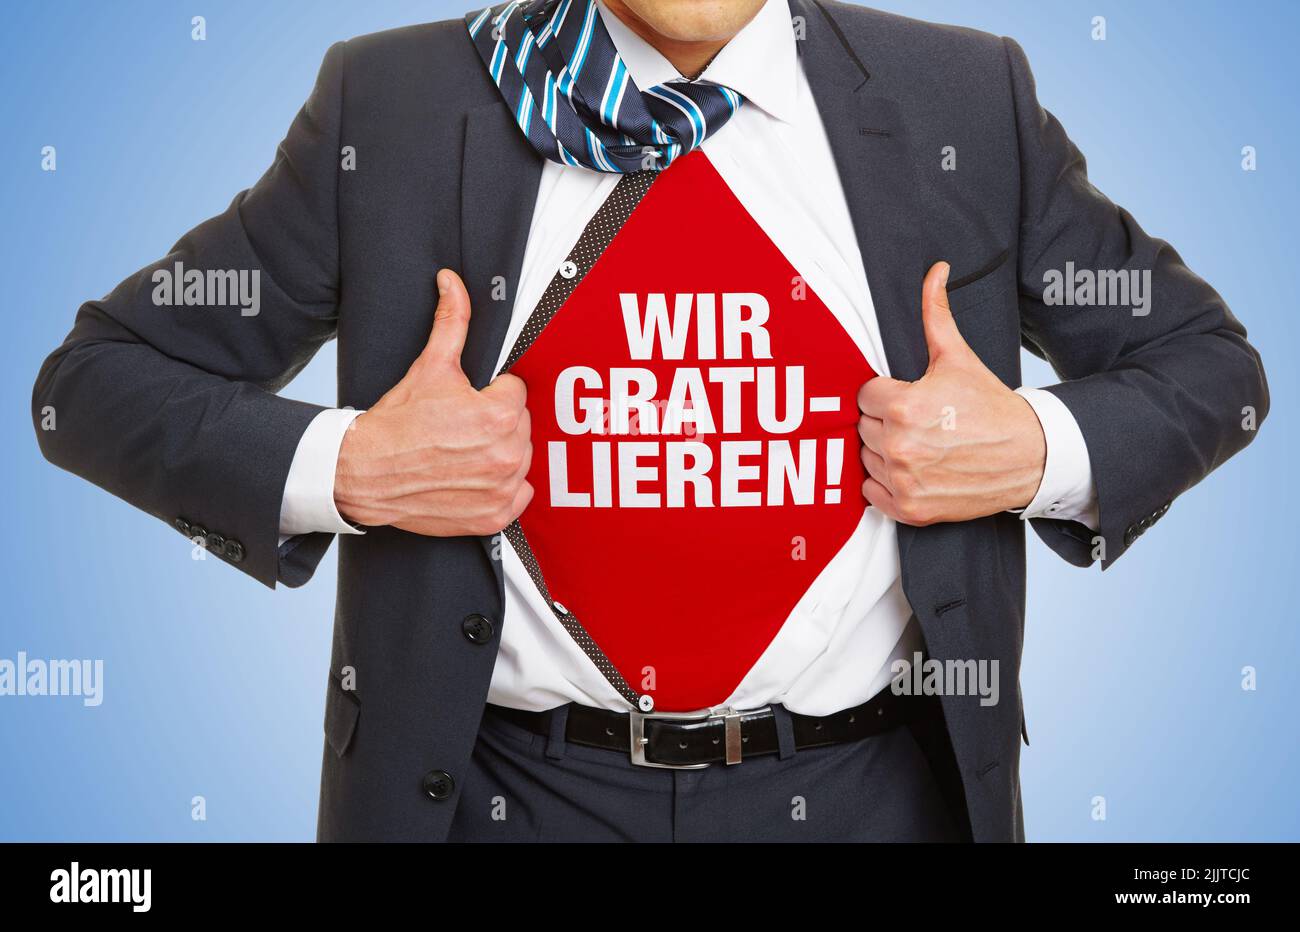 Businessman in a suit shows lettering Wir gratulieren! (German for: Congratulations from us!) under shirt Stock Photo